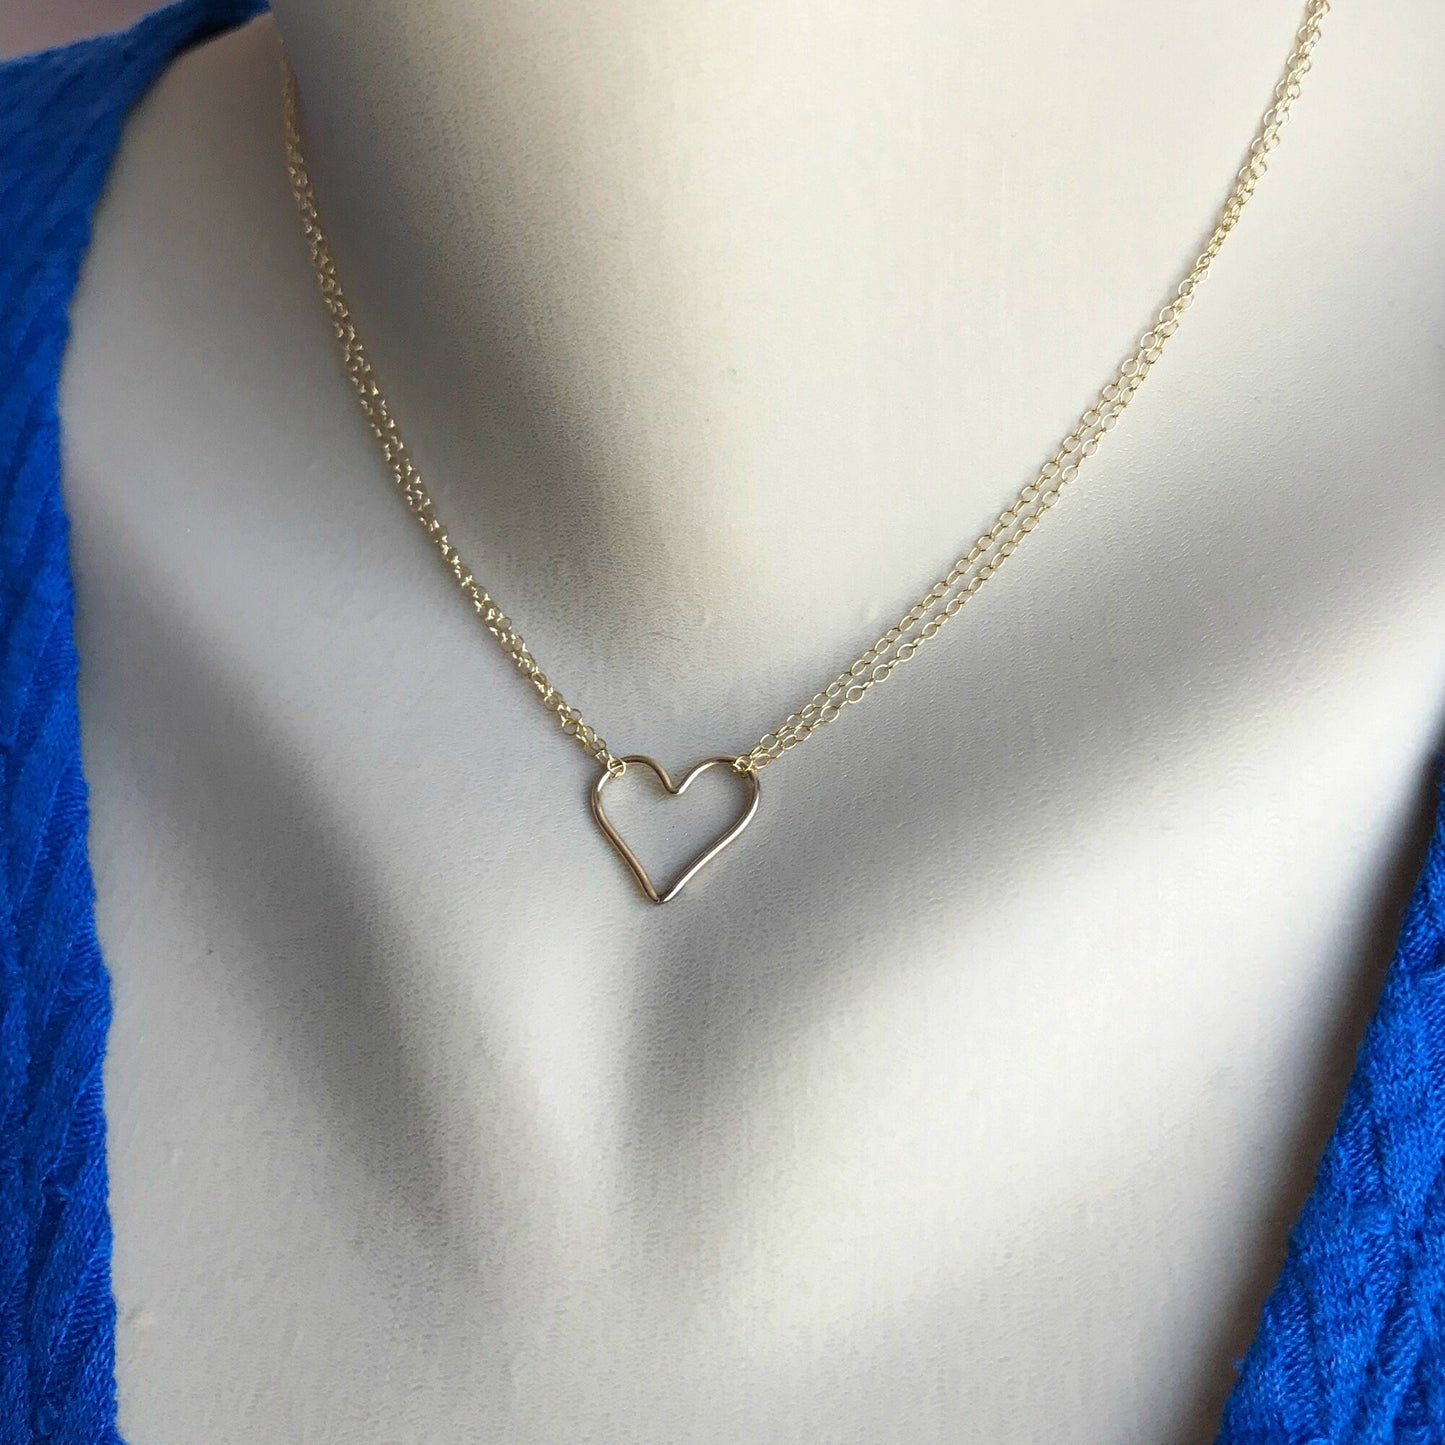 Heart necklace Heart Link Heart Jewelry Silver Heart Gold Heart Dainty Necklace Layering Necklace Necklace for Mom Everyday Necklace